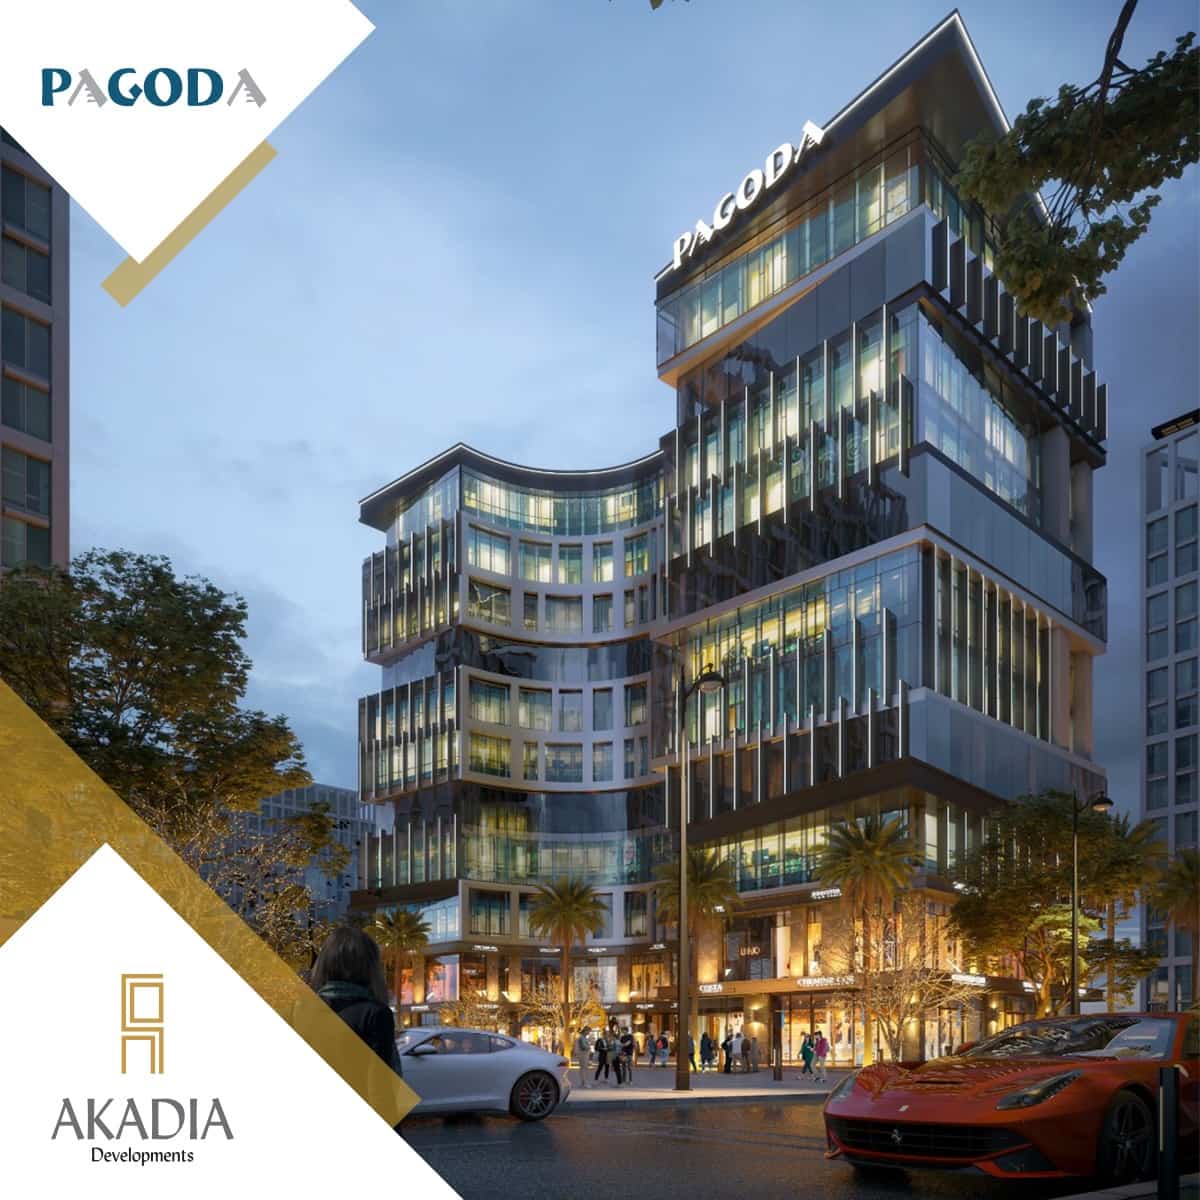 Commercial units for sale in Pagoda Mall